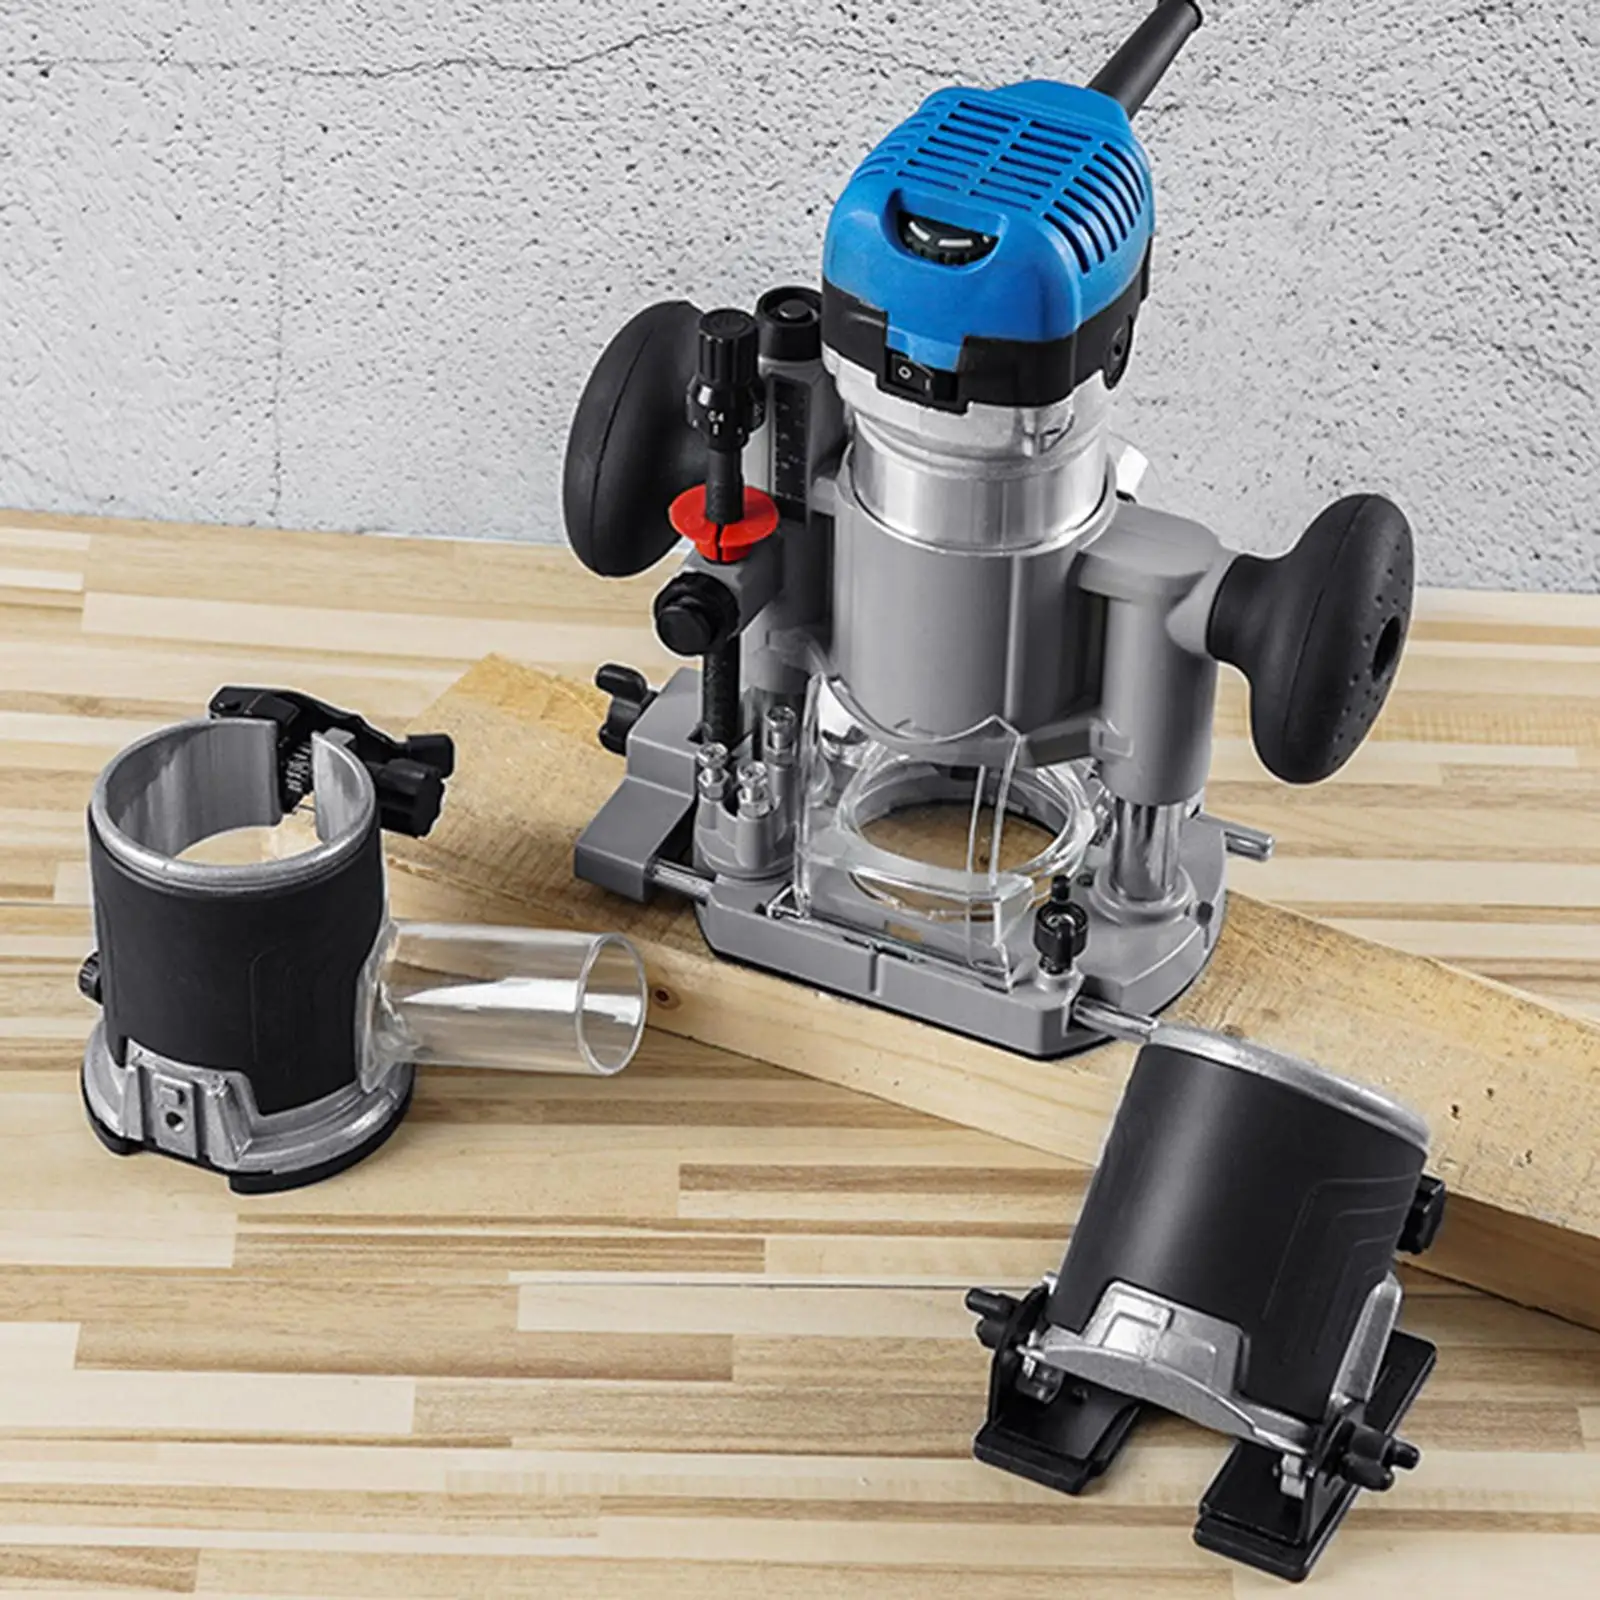 Electric Trimming Machine Accessories Trimming Machine Base Plunge Router Base for Edge Trimming